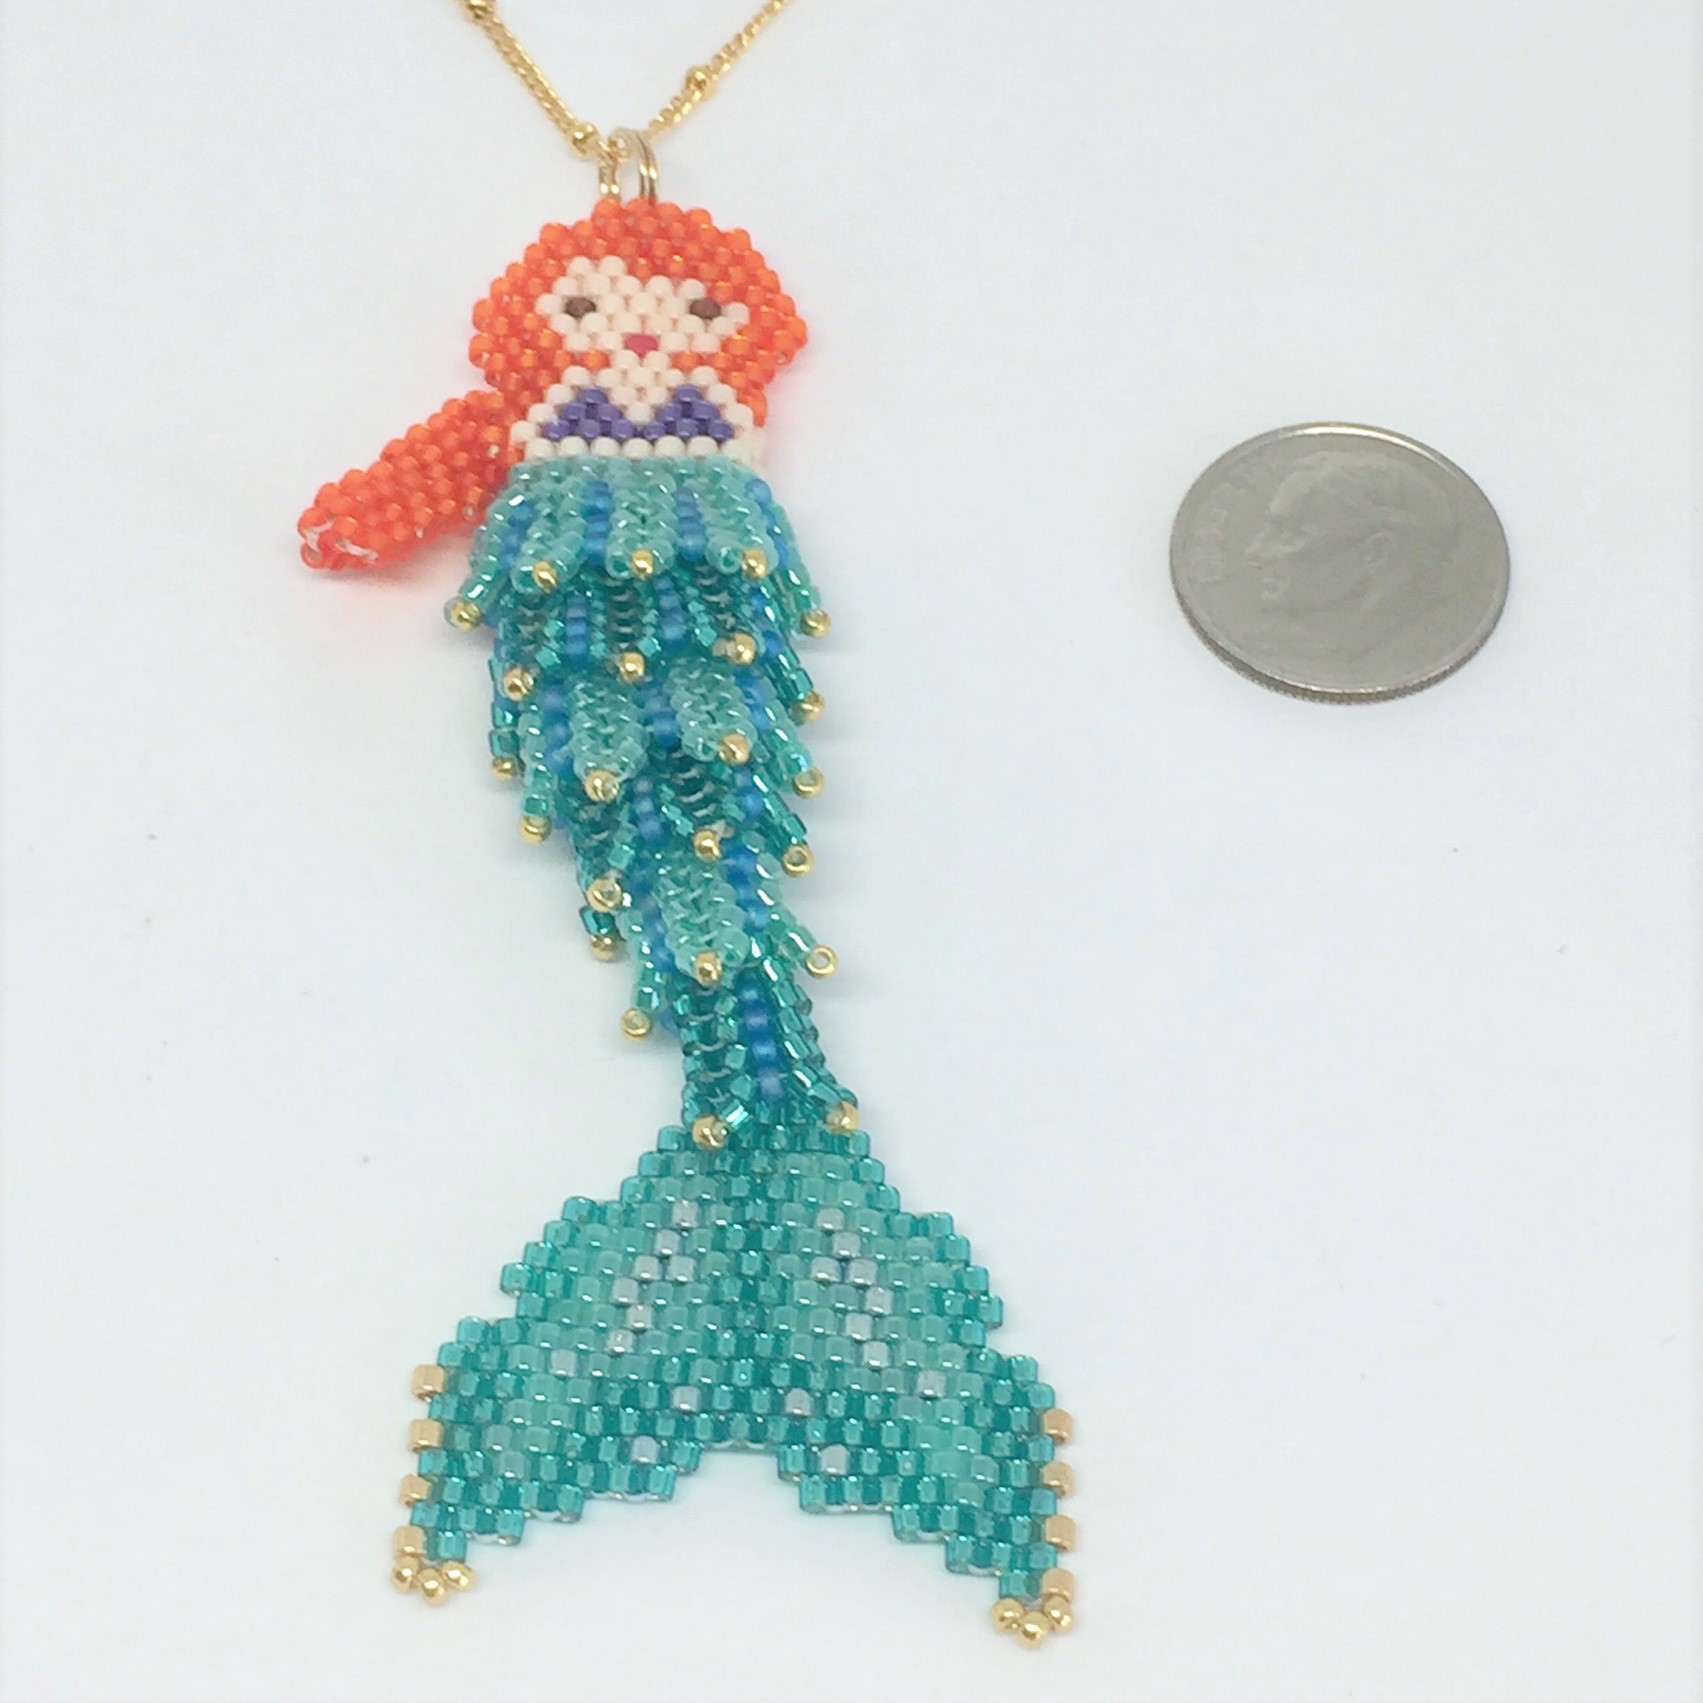 Beaded Mermaid, Movable 3-D Hand Beaded Sea Goddess with Japanese Seed Beads  - Fuession Jewelry